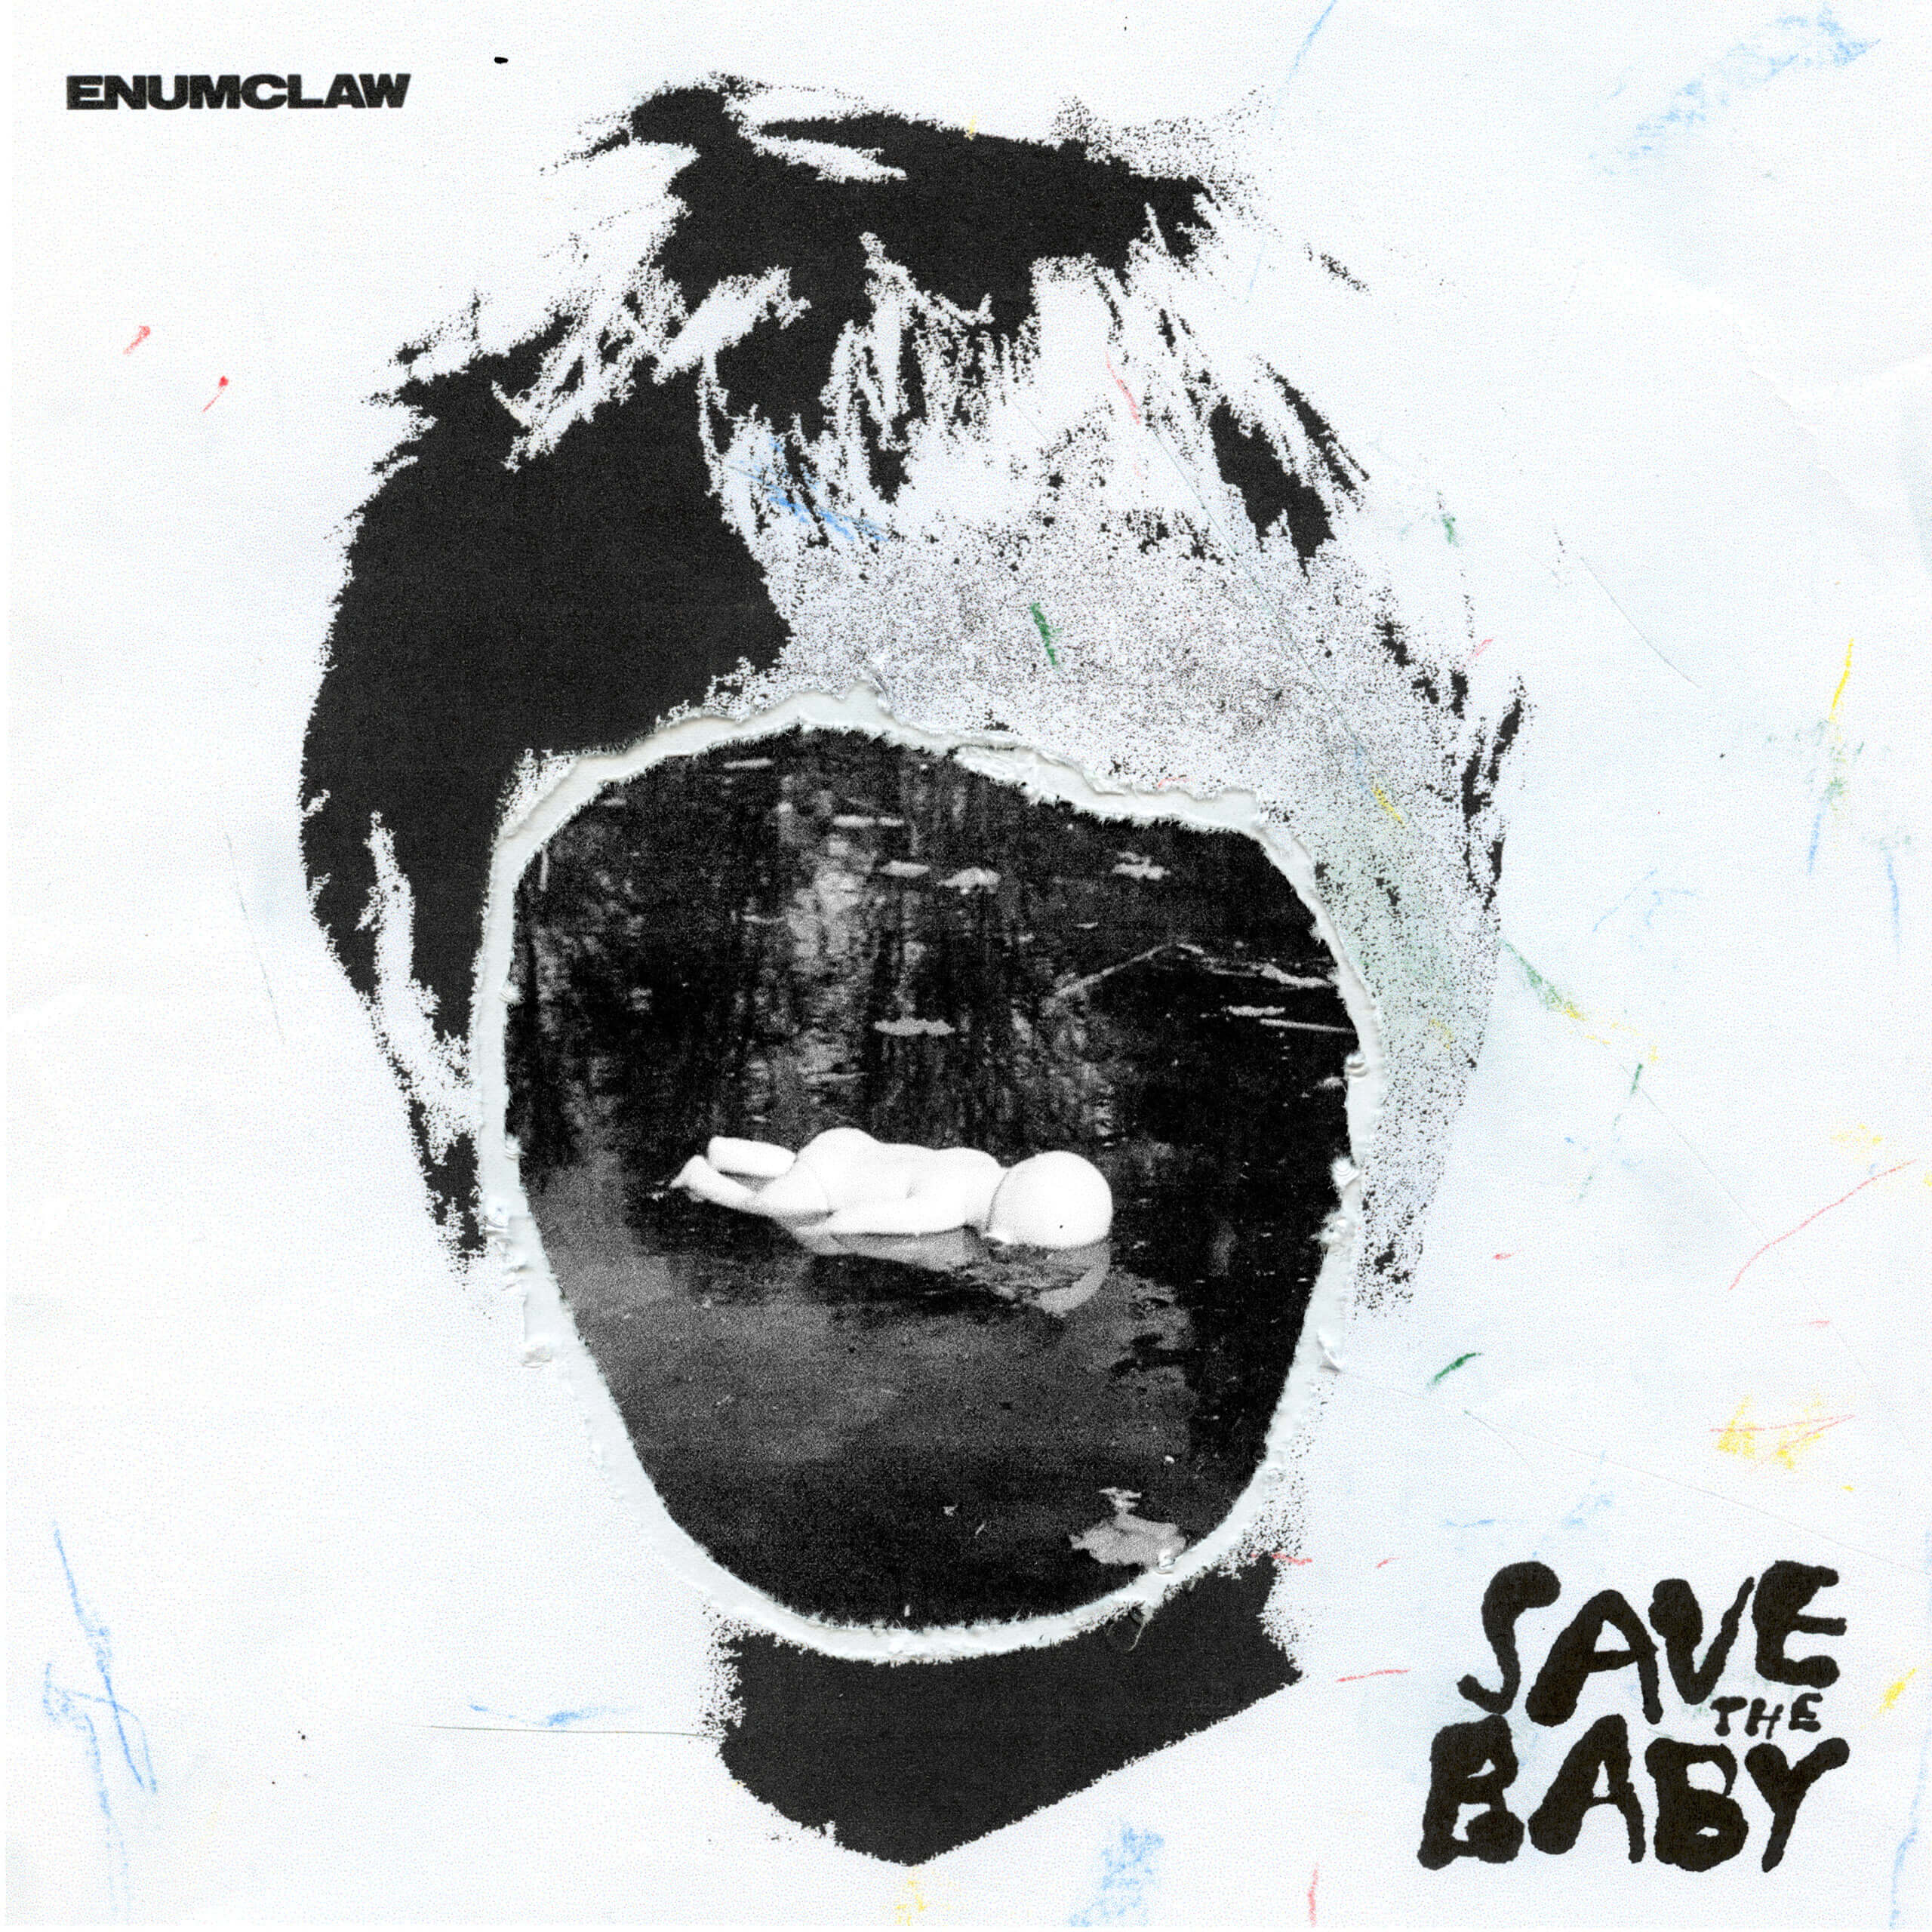 Save The Baby by Enumclaw album review by Greg Walker for Northern Transmissions